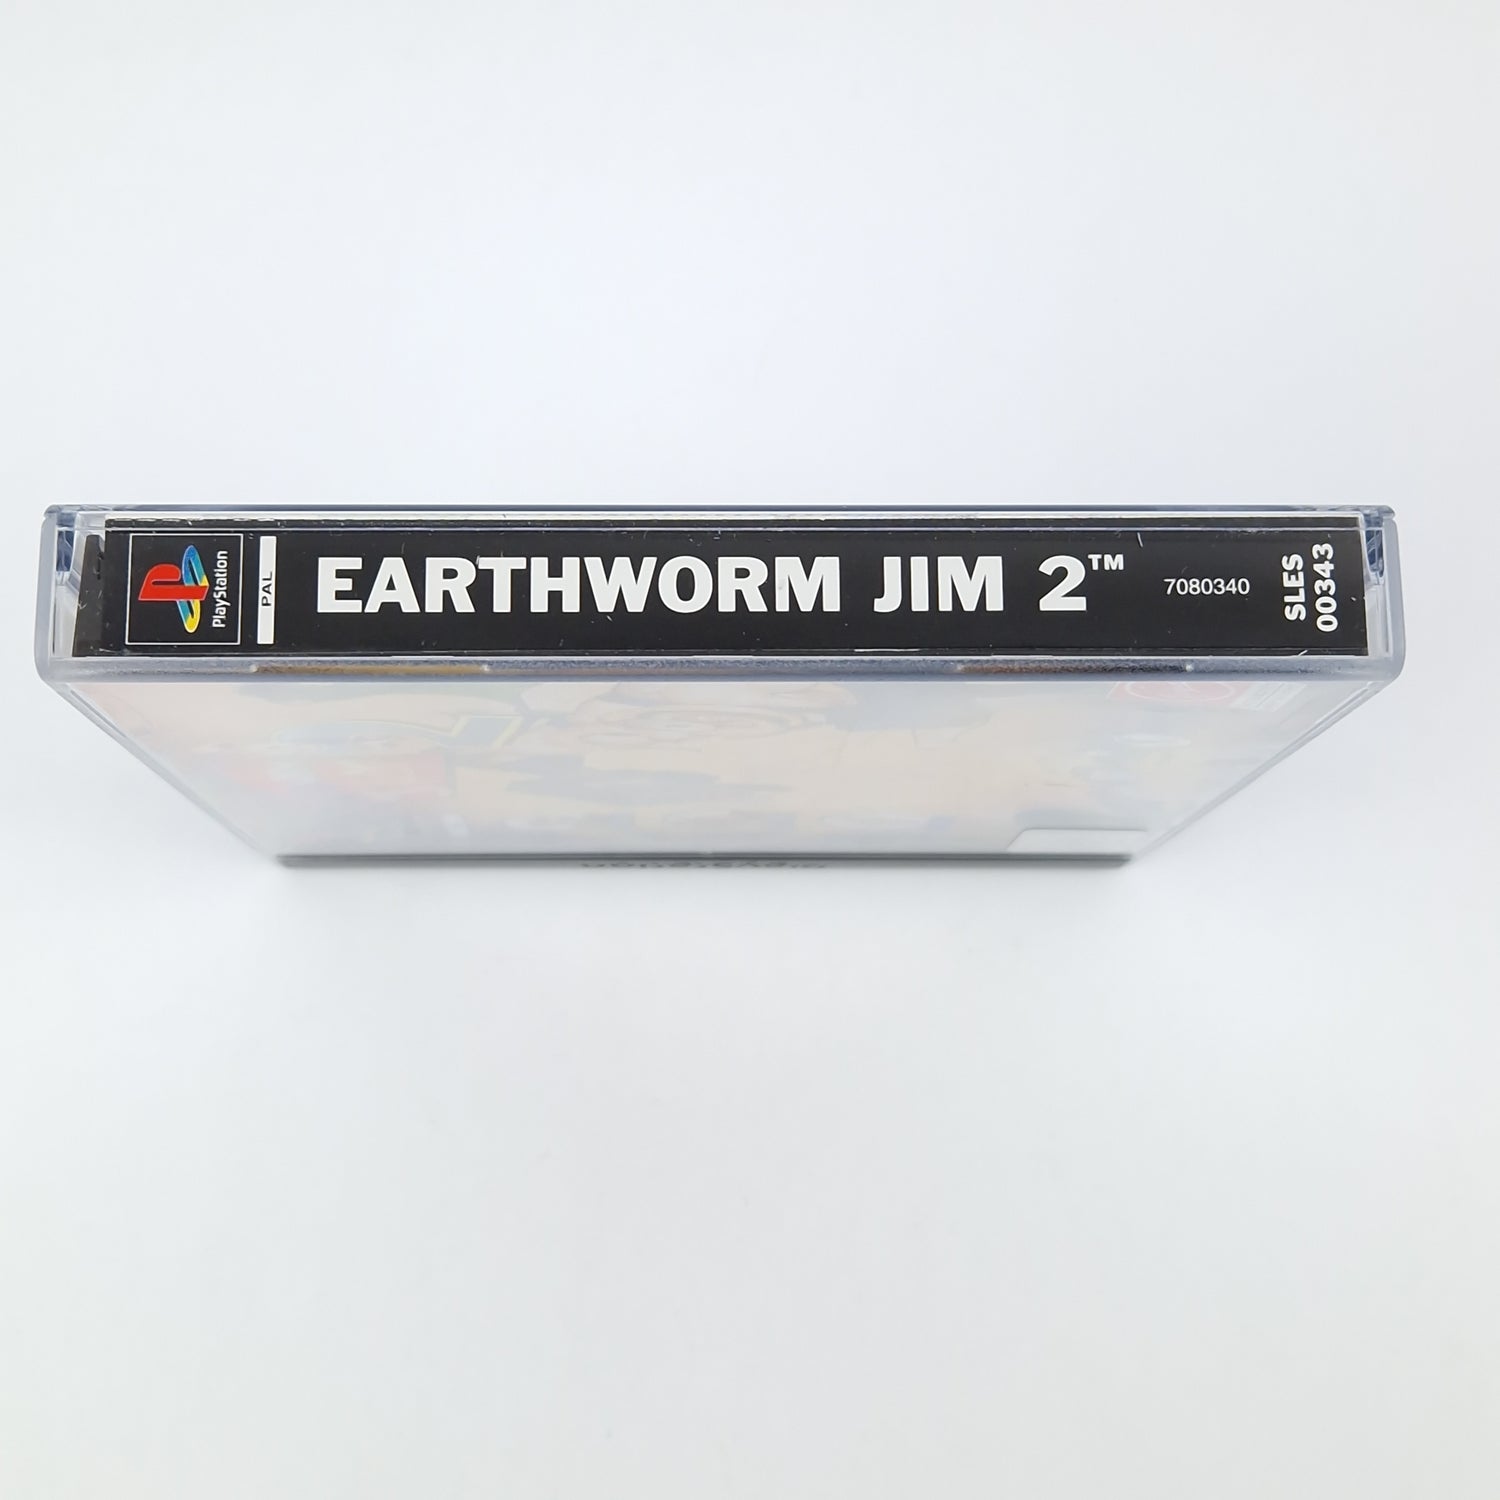 Playstation 1 game: Earth Worm Jim 2 - CD instructions OVP | SONY PS1 PSX PAL